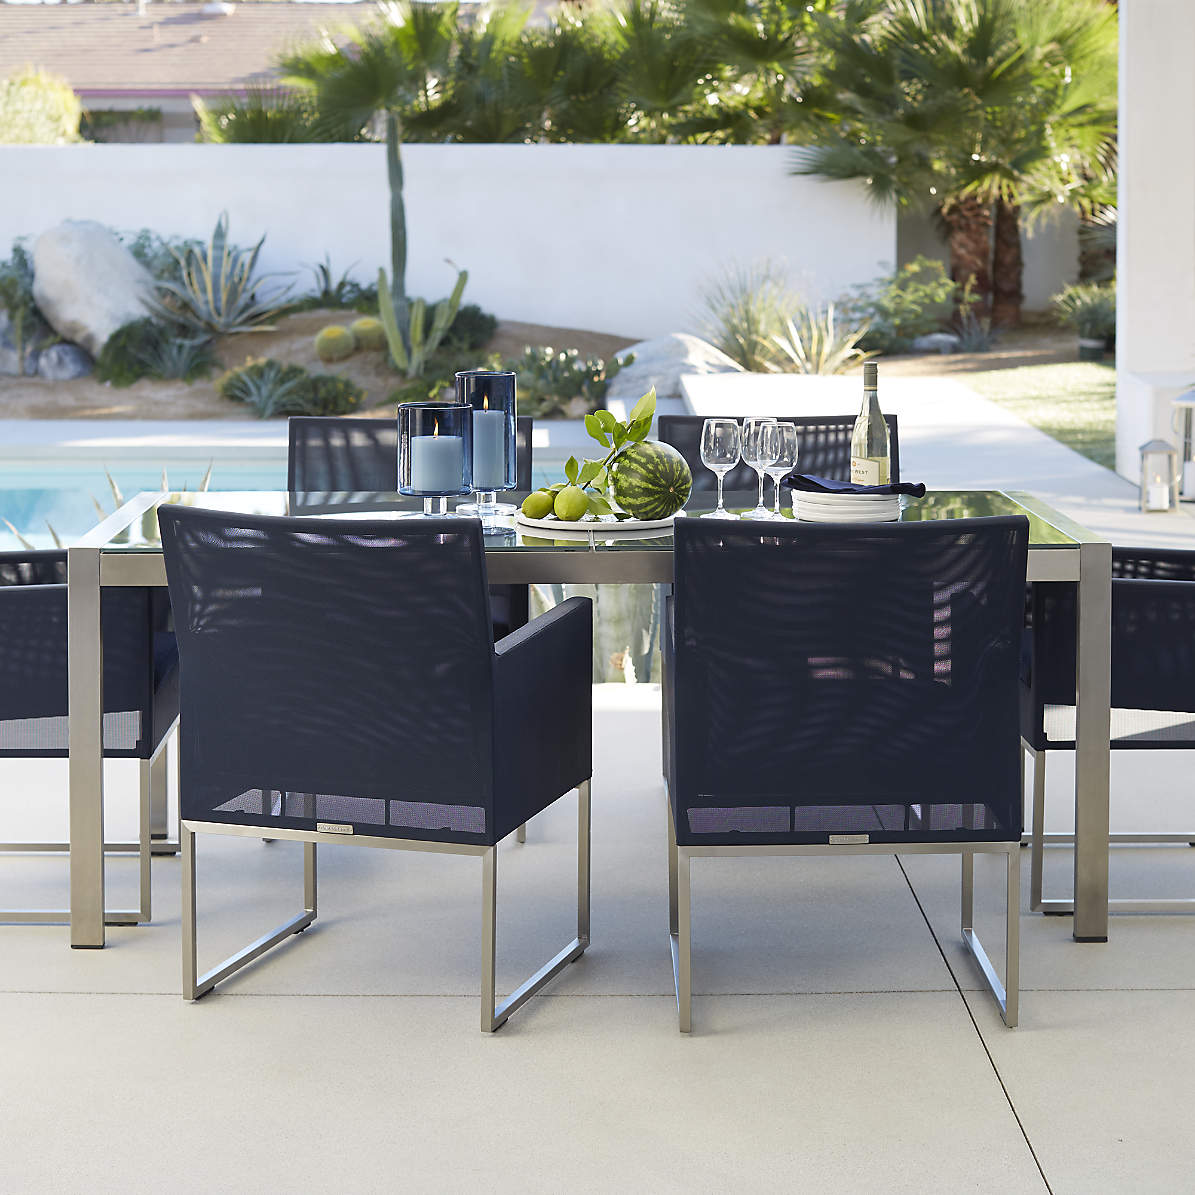 Dune Rectangular Outdoor Patio Dining, Navy Dining Table And Chairs